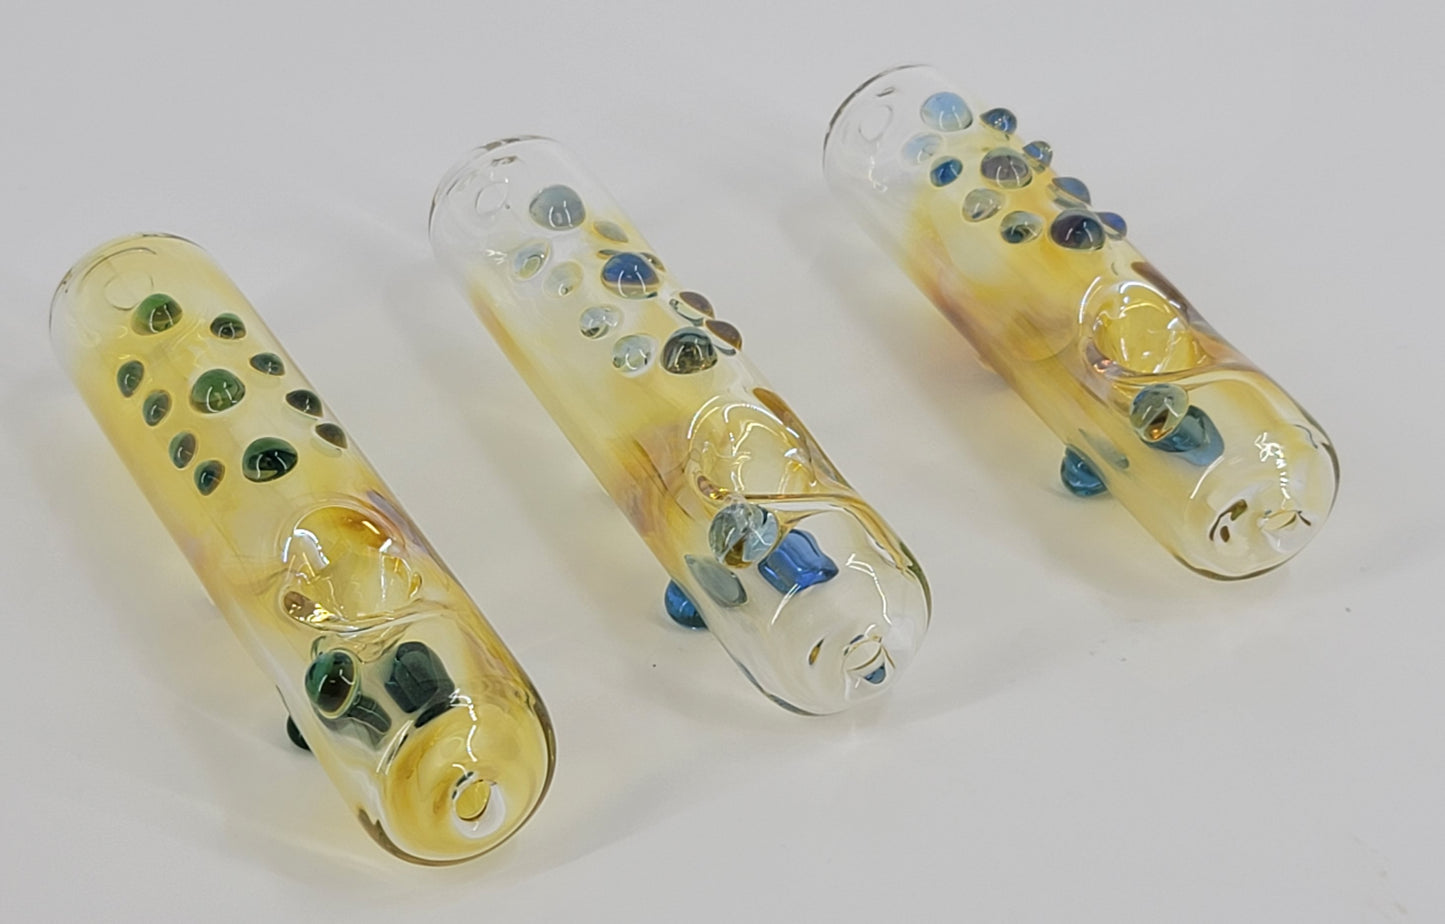 American Made Glass Steamrollers